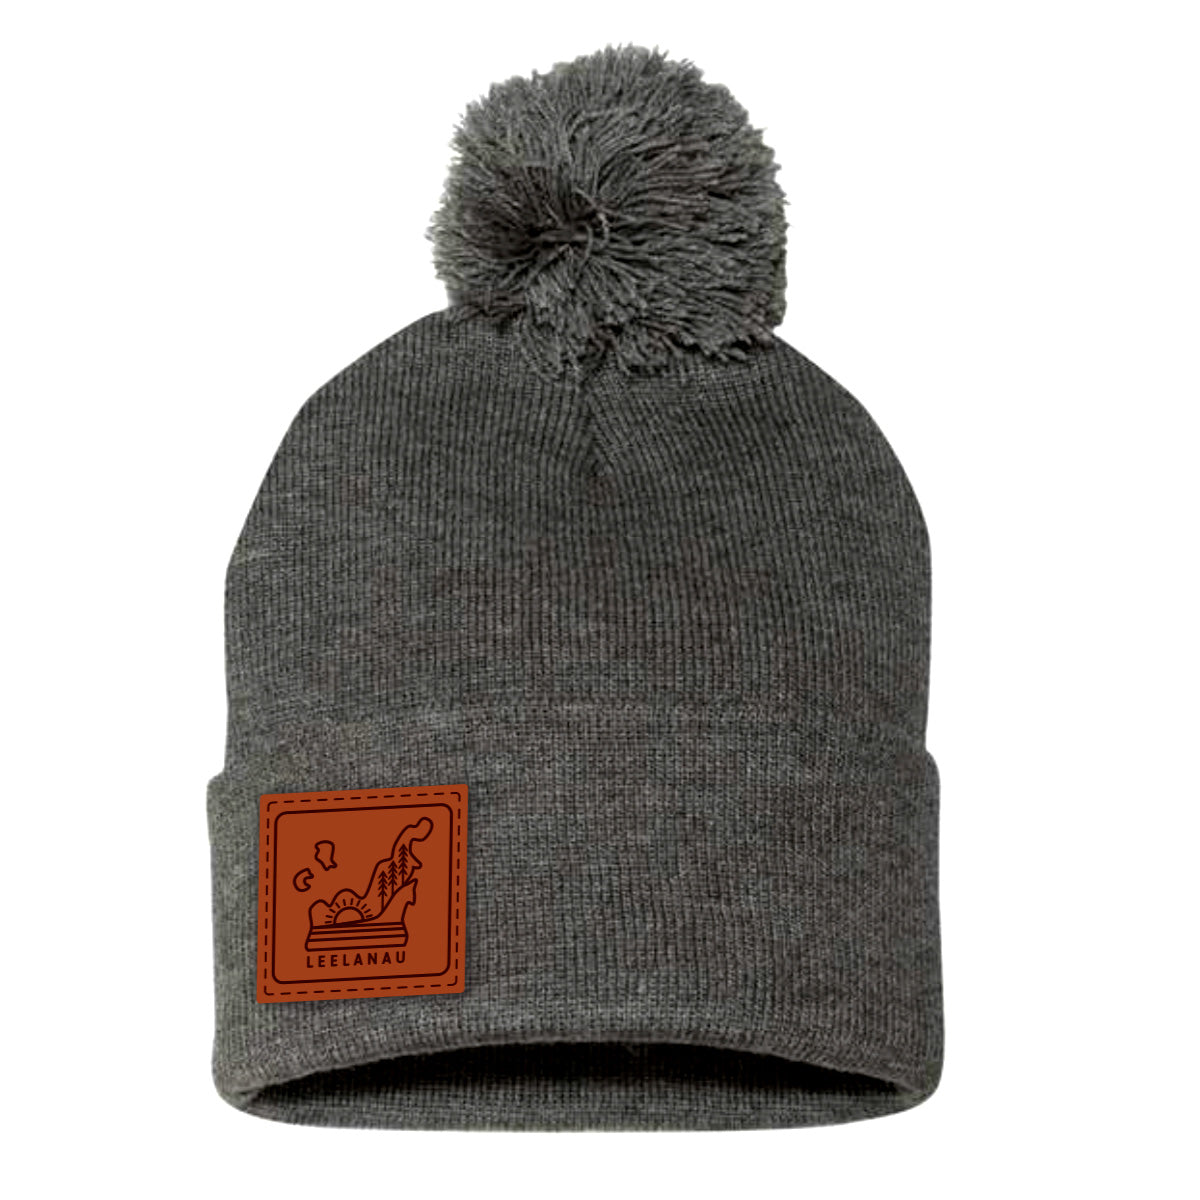 Jacob and Louise Knit Hat - Multiple colors